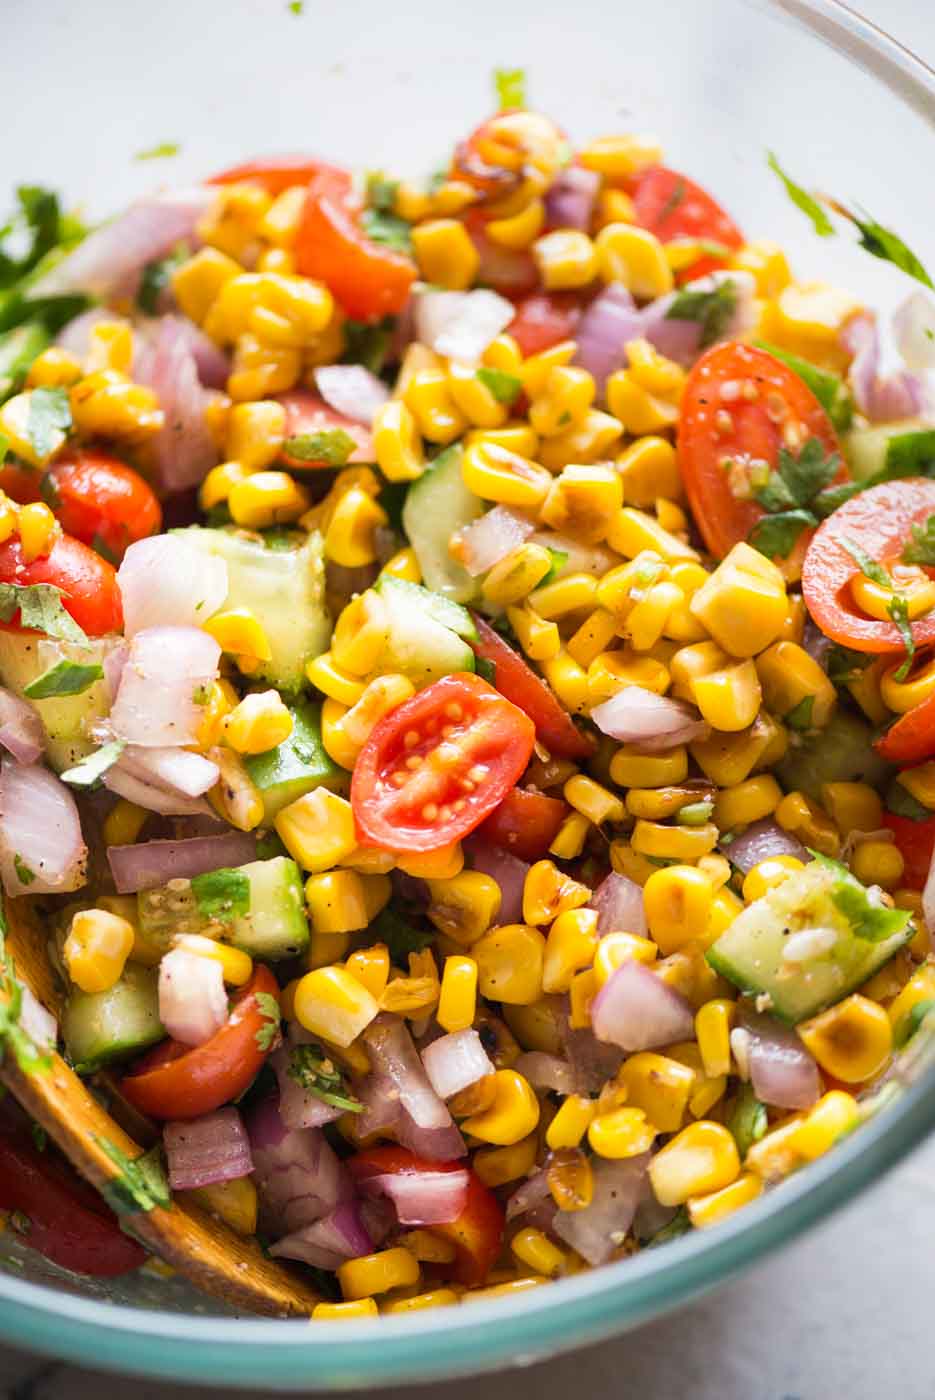 Fresh Roasted Corn Salad is packed with sweet corns, cucumber, tomato, onion and tossed in a lemony vinaigrette. Charred corn ads a lot of flavour to the salad. This quick salad is a perfect side dish in summer BBQs or for potlucks.